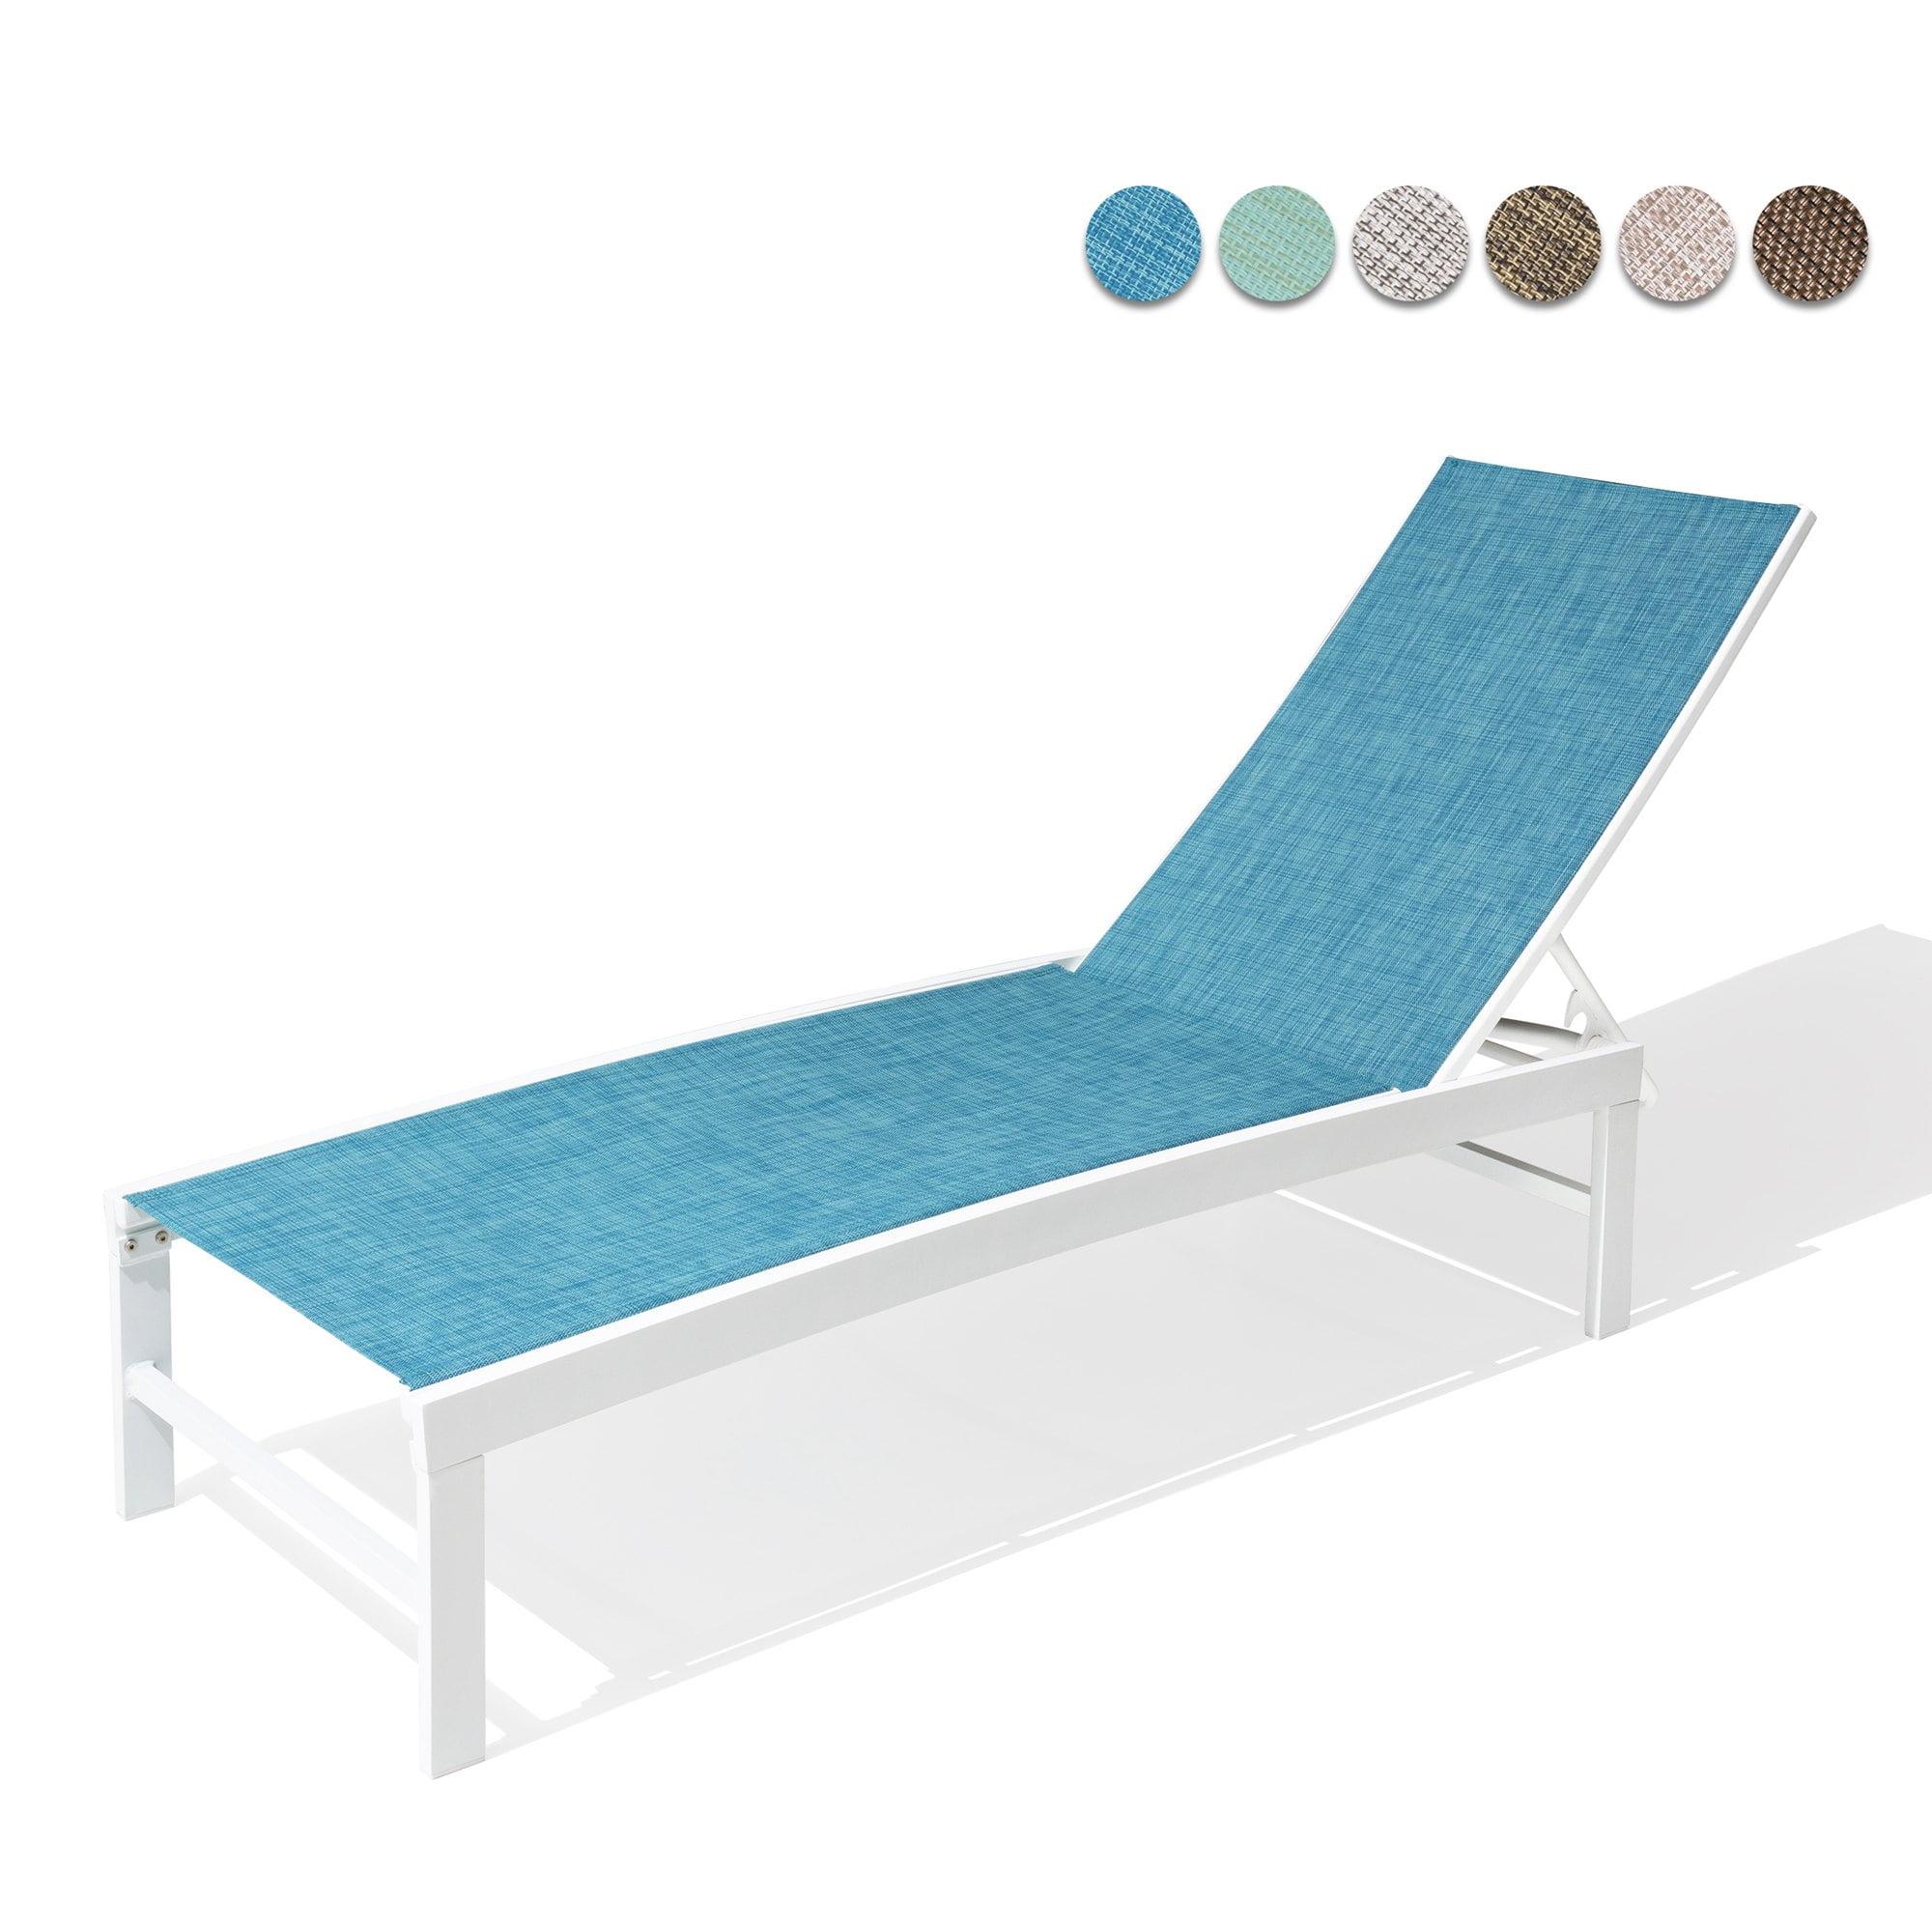 Seabreeze Blue and White Adjustable Aluminum Beach Lounger